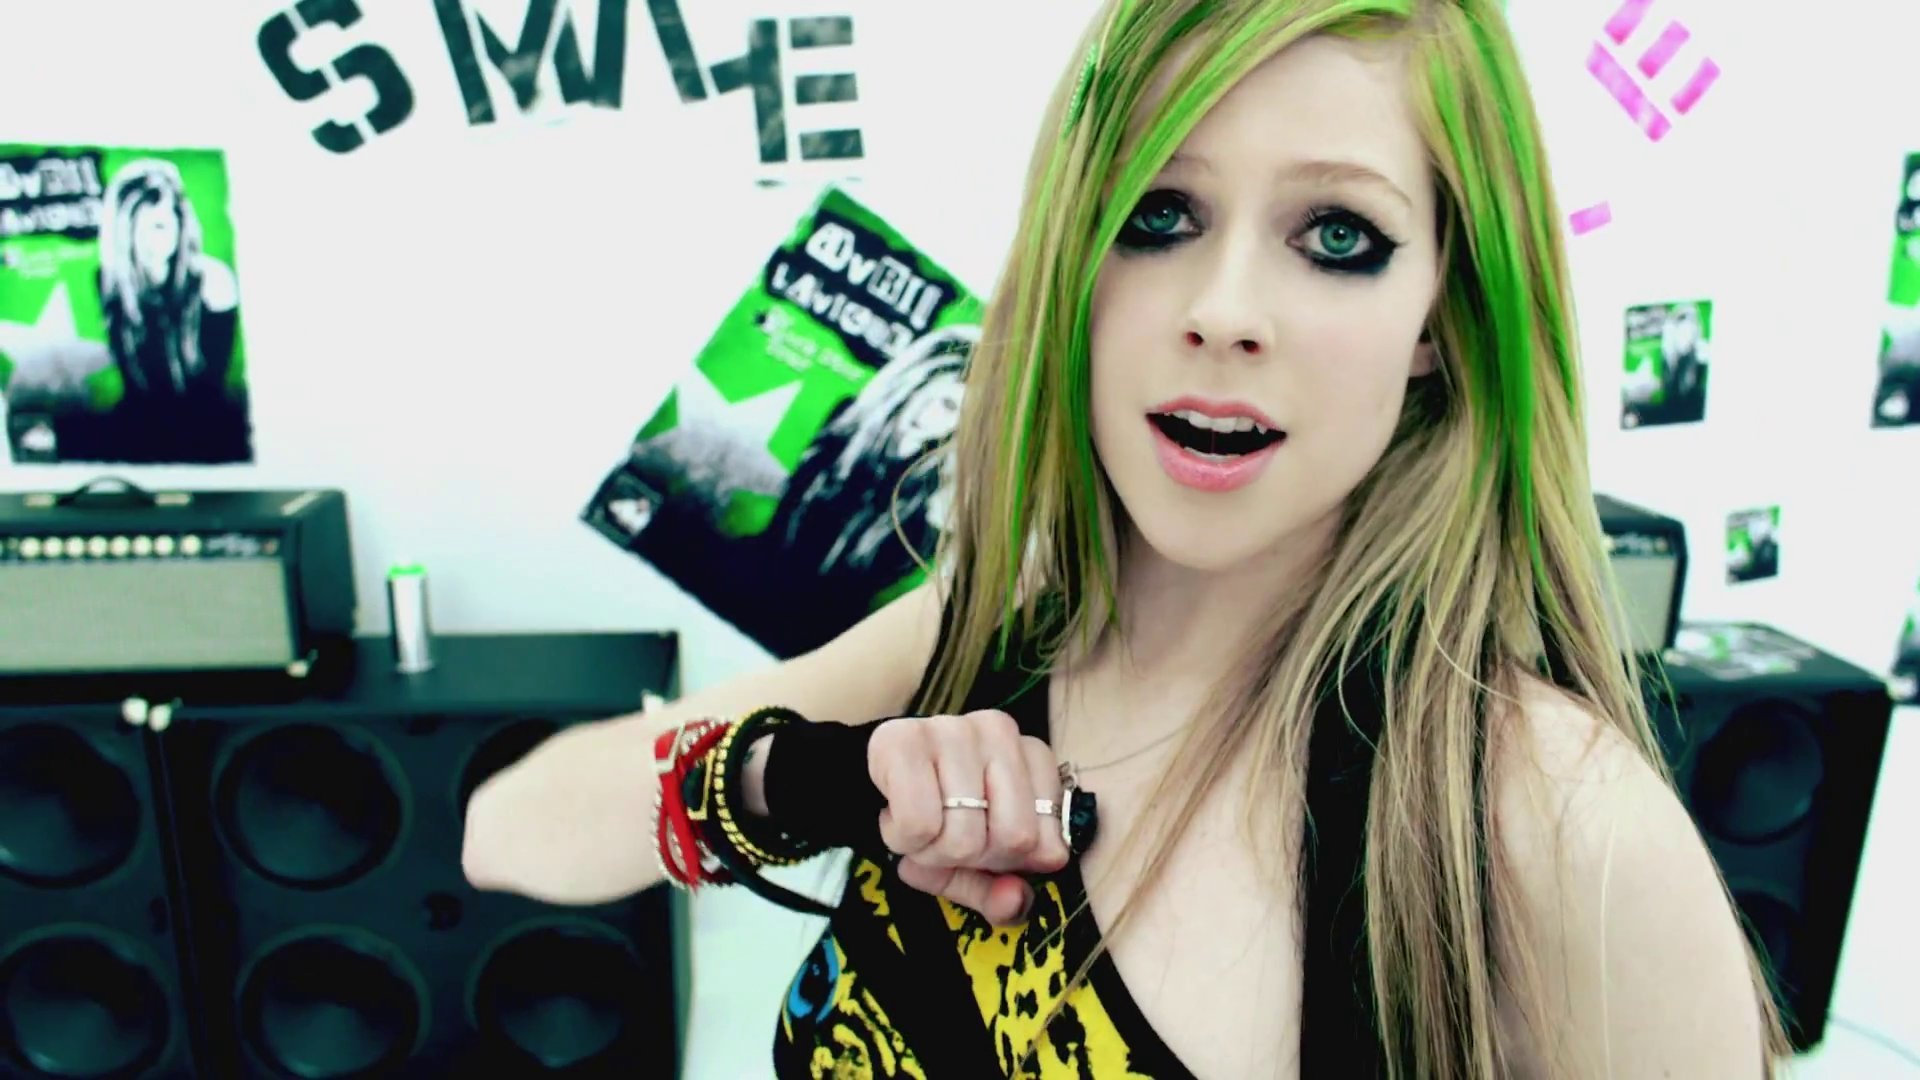 Avril lavigne is getting chubby